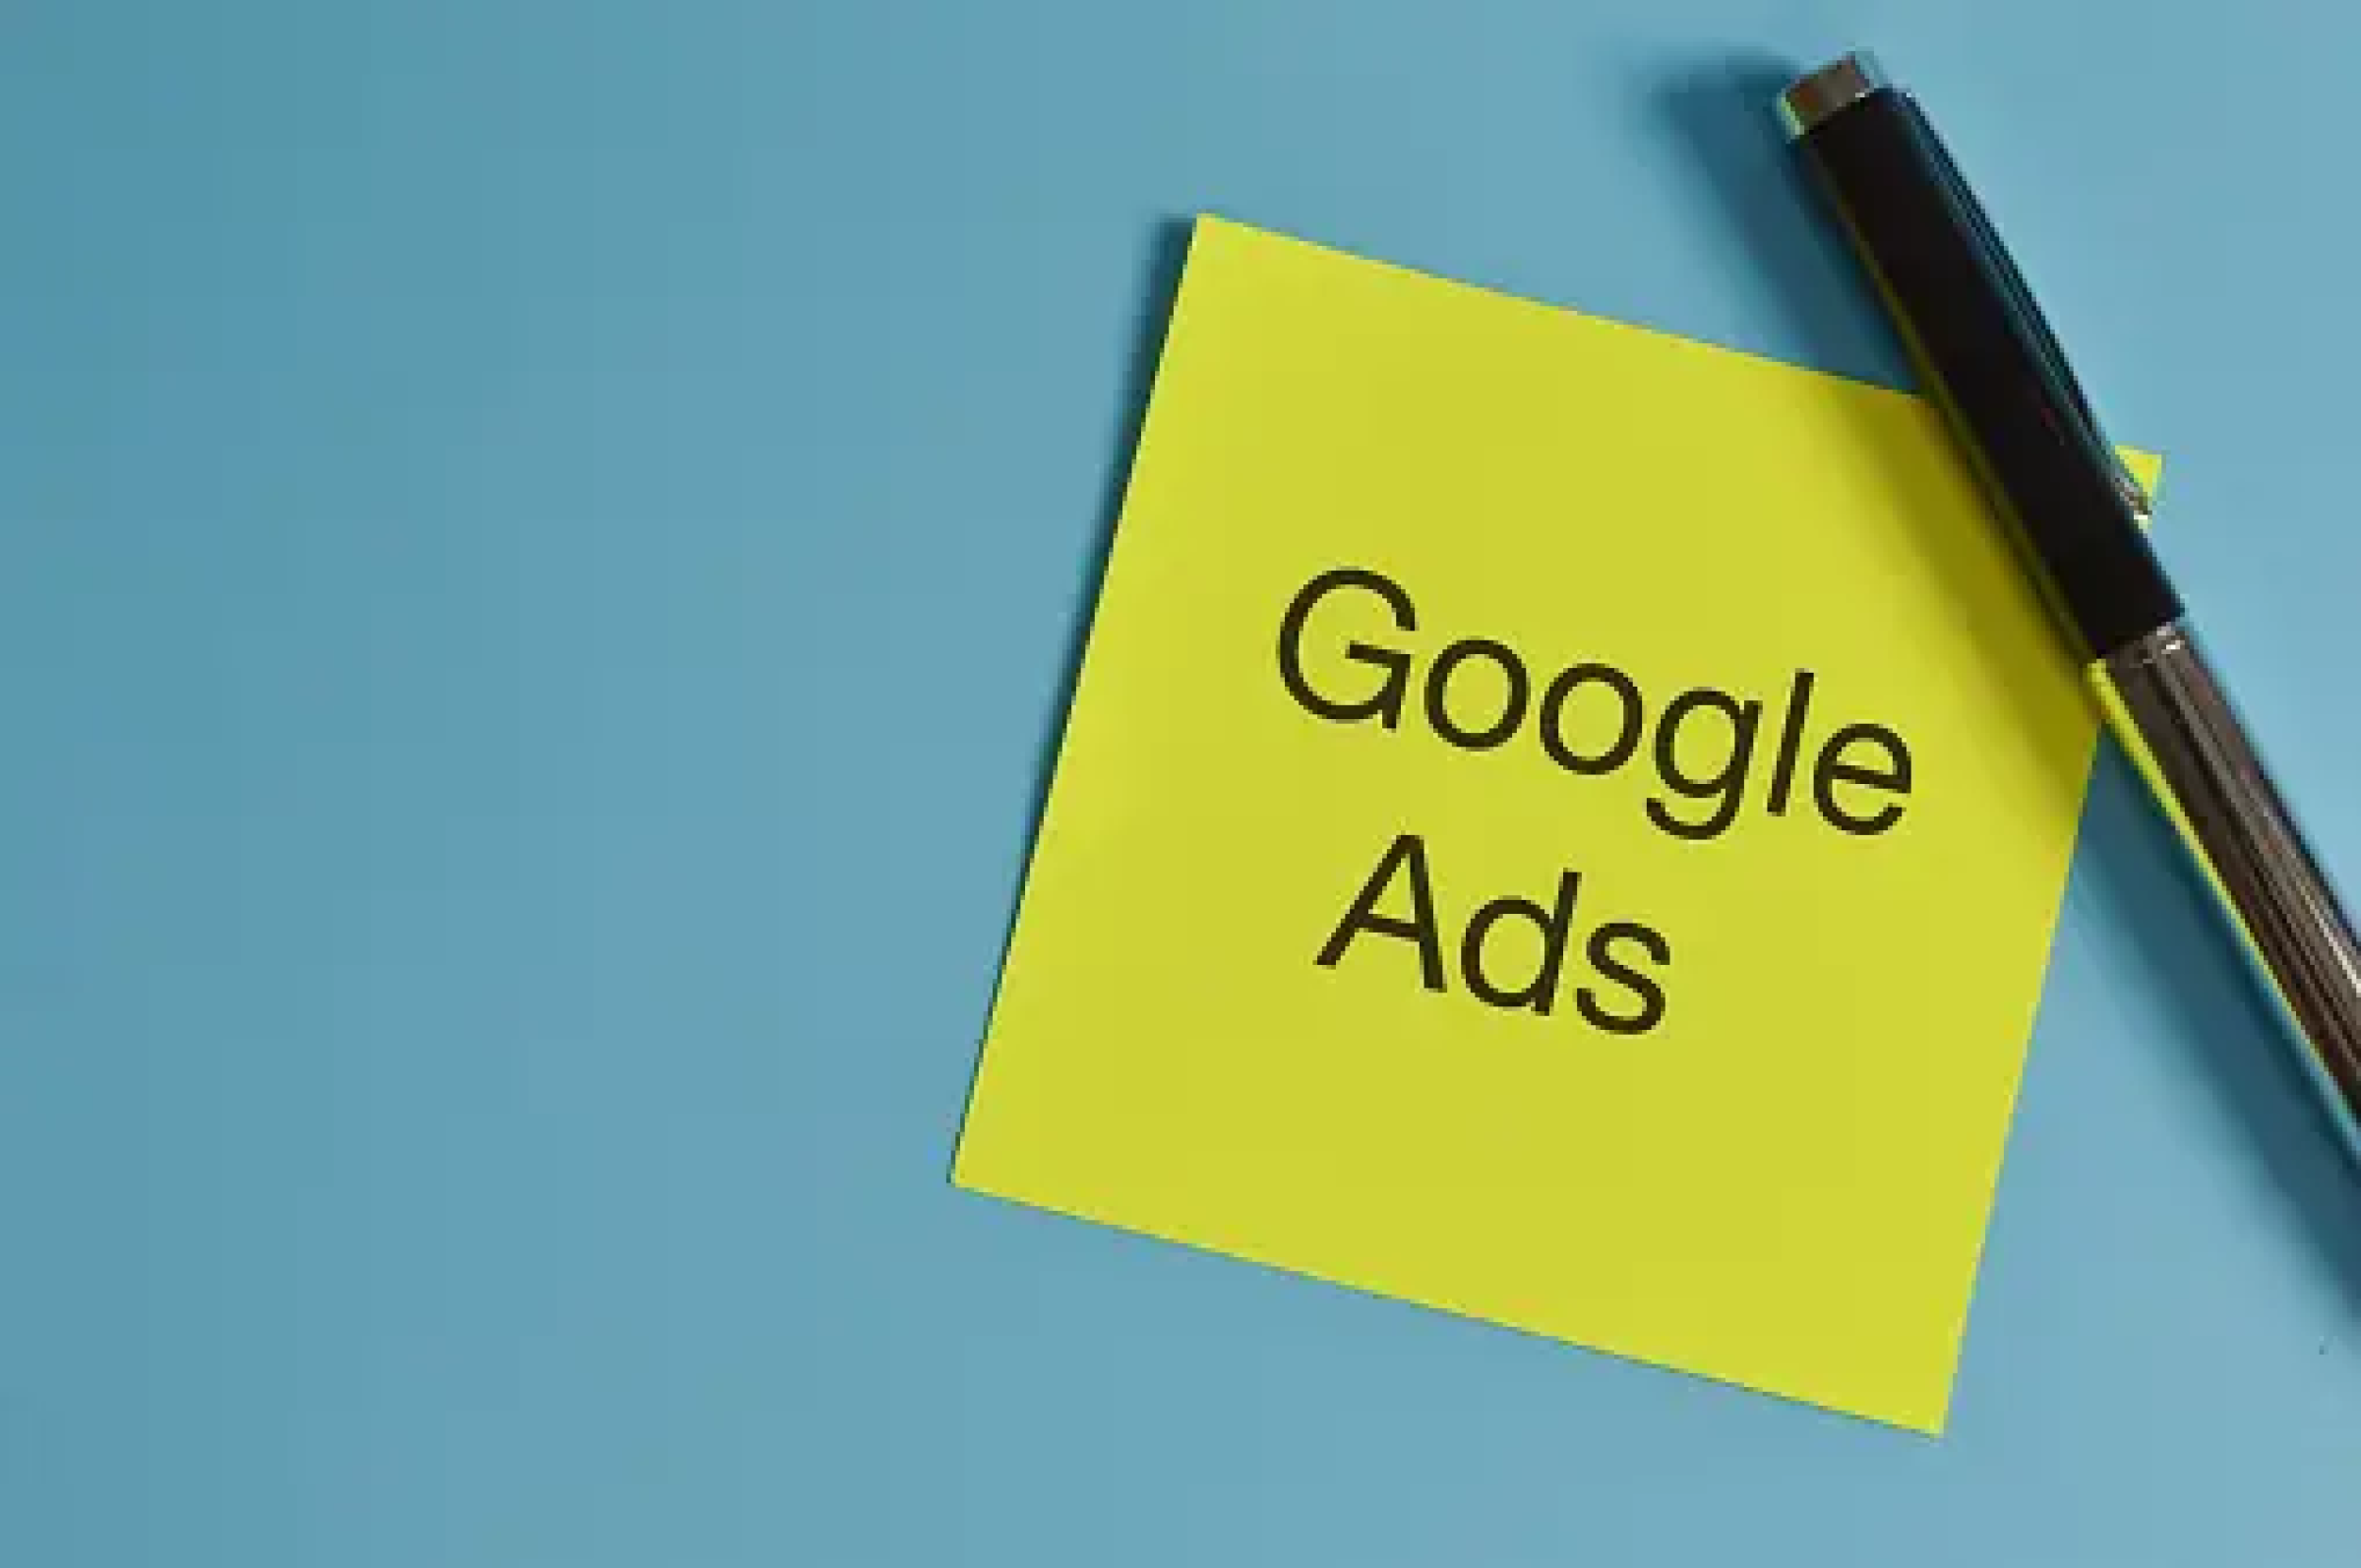 How much does advertising on Google ads cost?